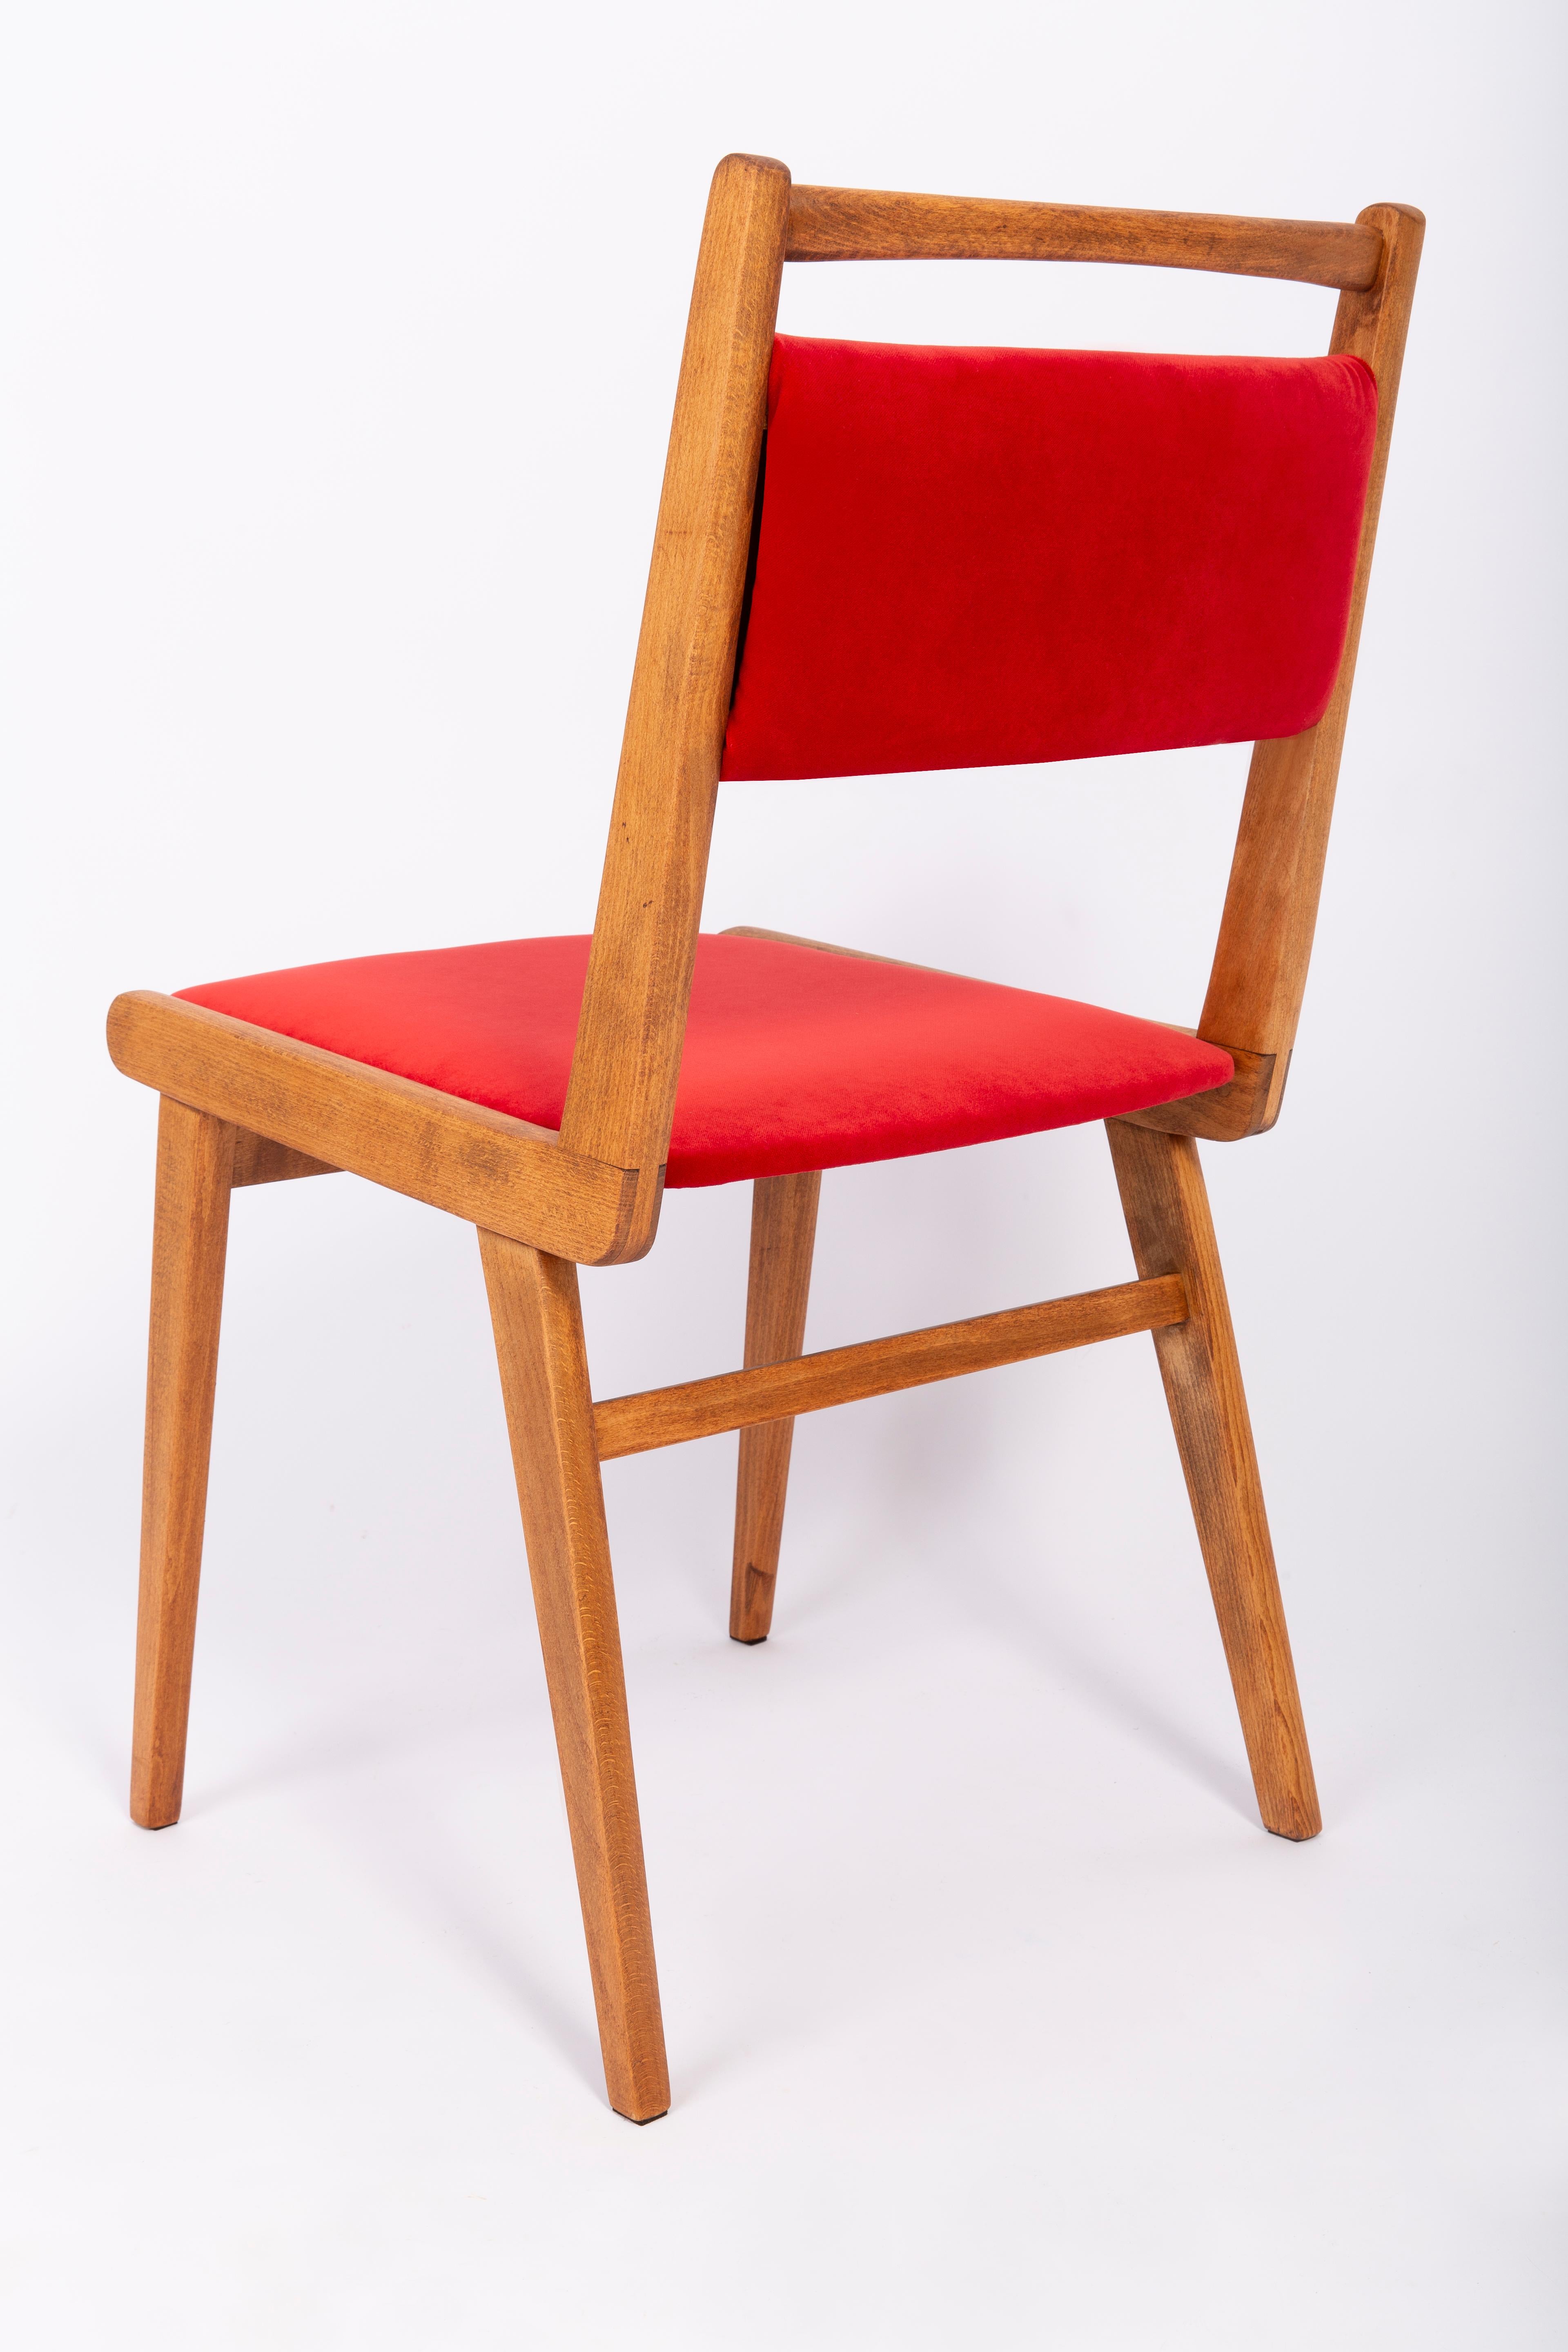 Set of Eight 20th Century Red Velvet Chairs, by Rajmund Halas, Poland, 1960s For Sale 3